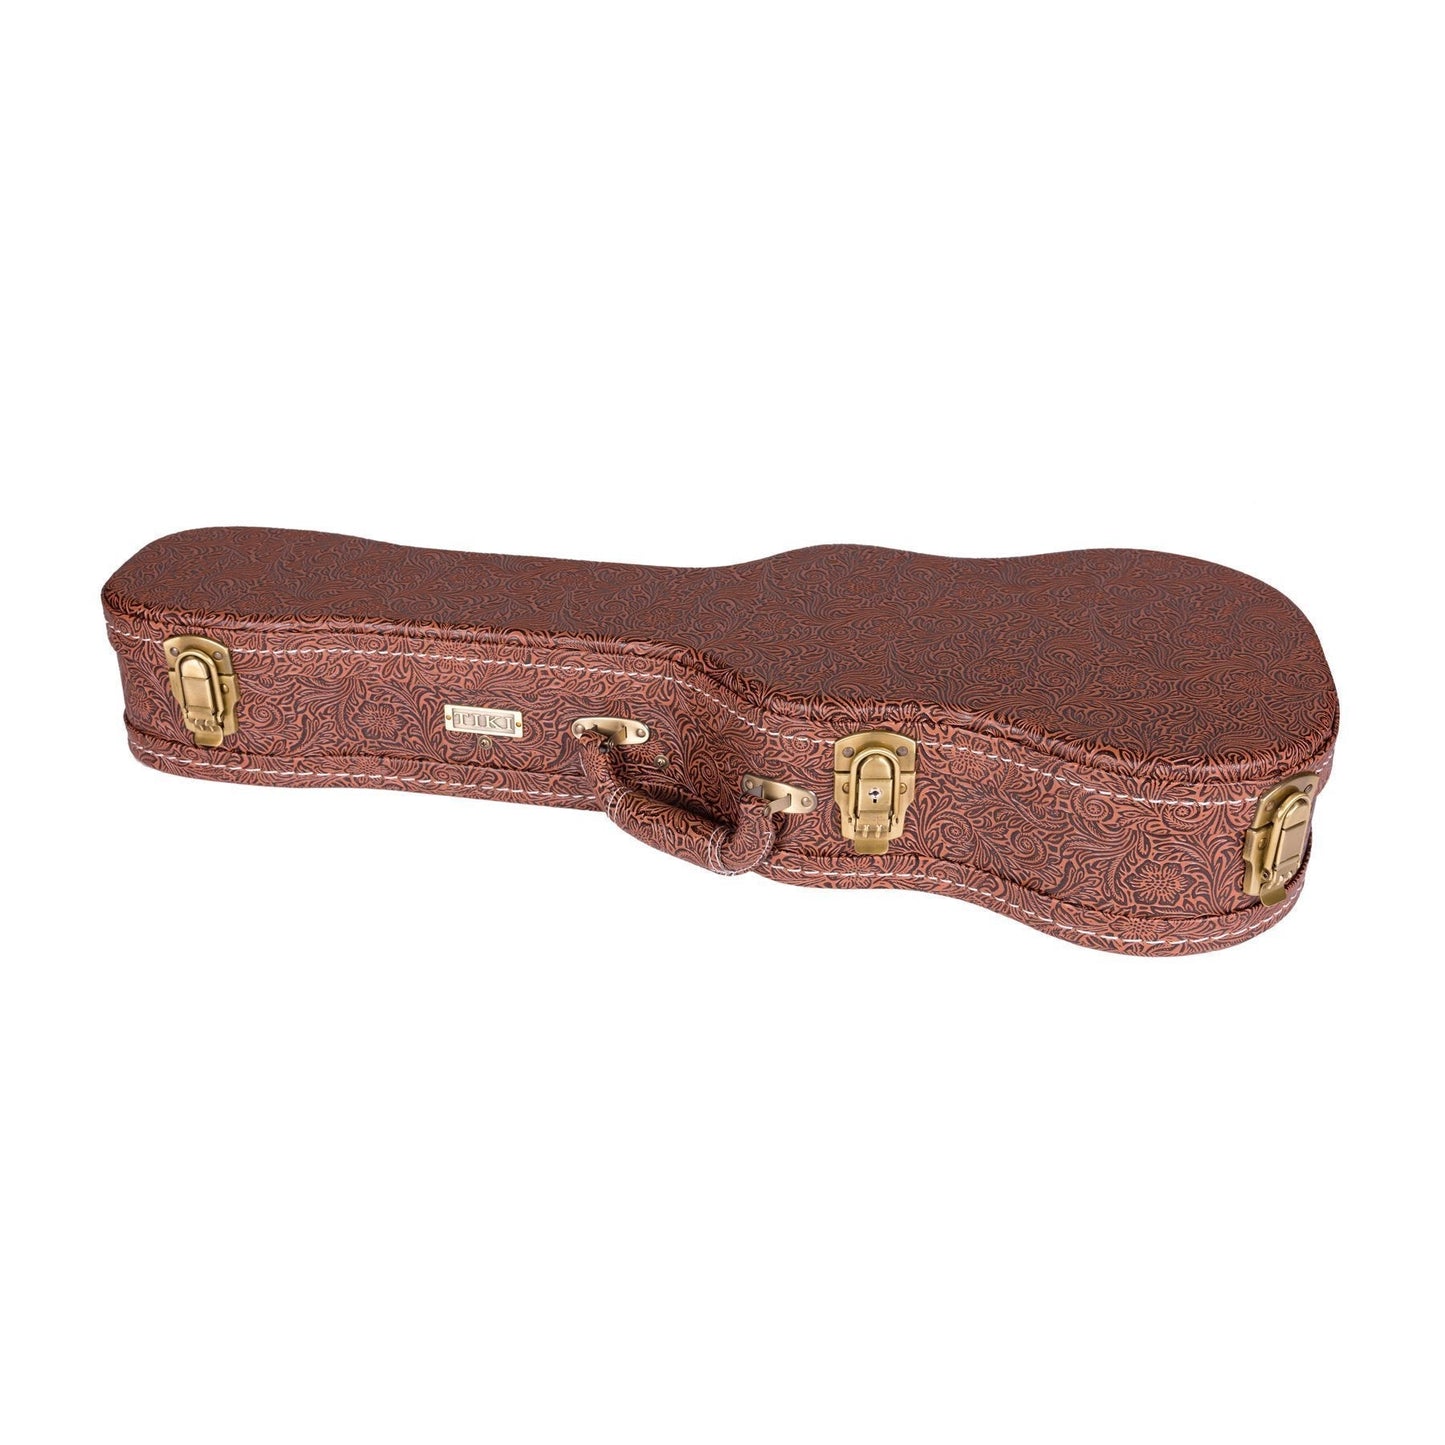 Load image into Gallery viewer, Tiki &amp;#39;7 Series&amp;#39; Cedar Solid Top Electric Tenor Ukulele with Hard Case (Natural Satin)
